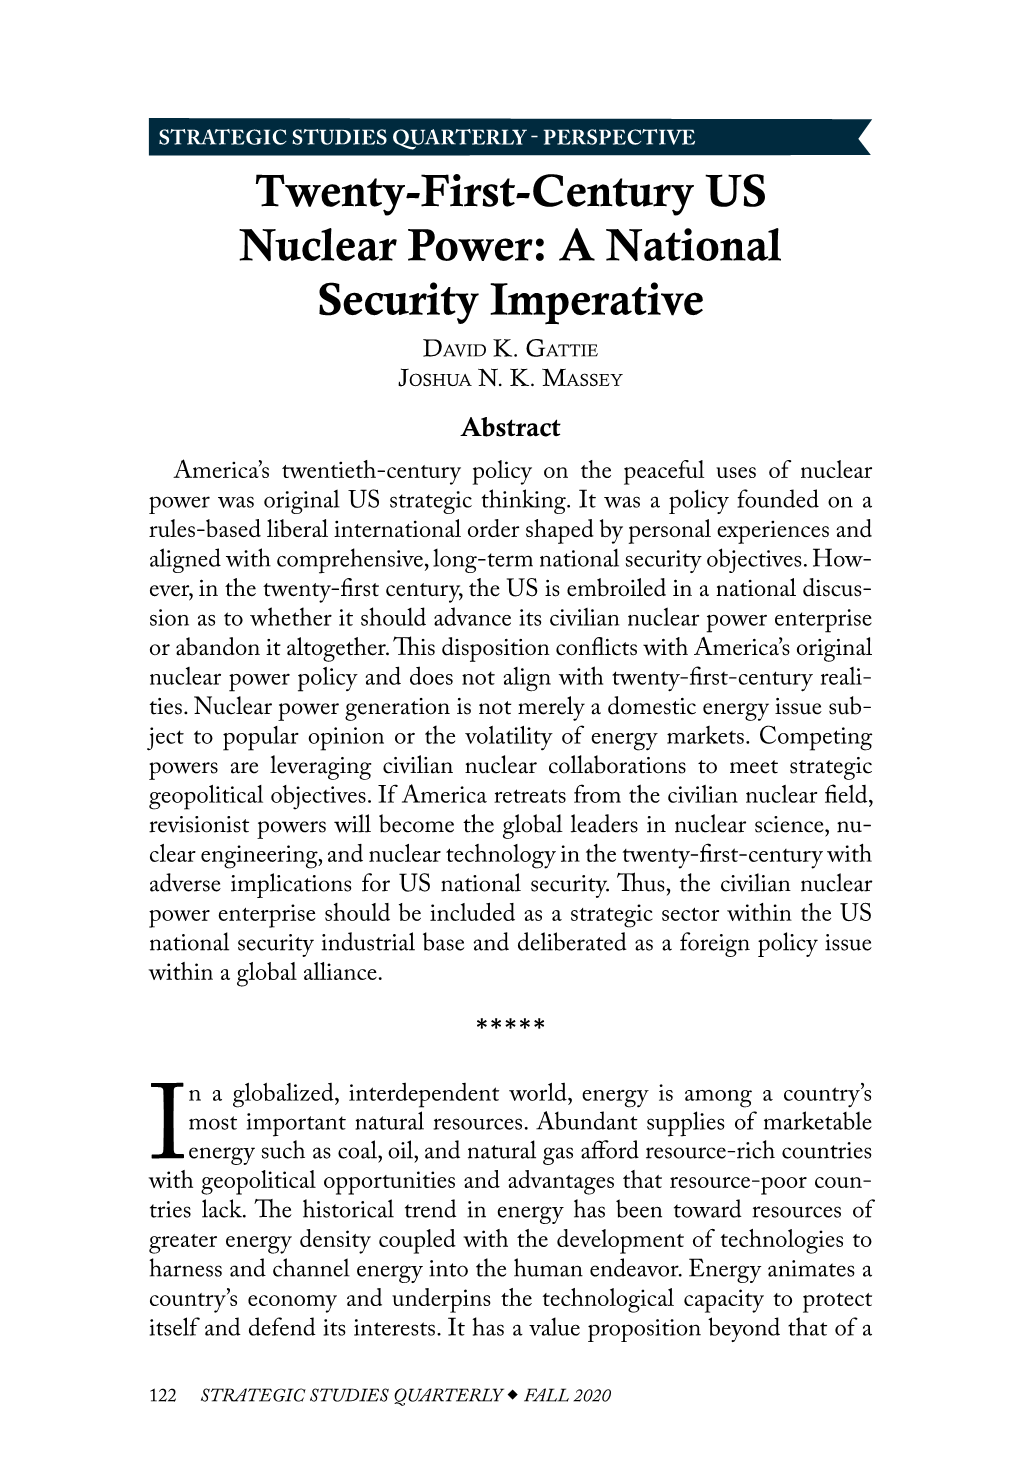 Twenty-First-Century US Nuclear Power: a National Security Imperative Market Commodity As It Defines and Shapes Geopolitical Relationships and International Stature